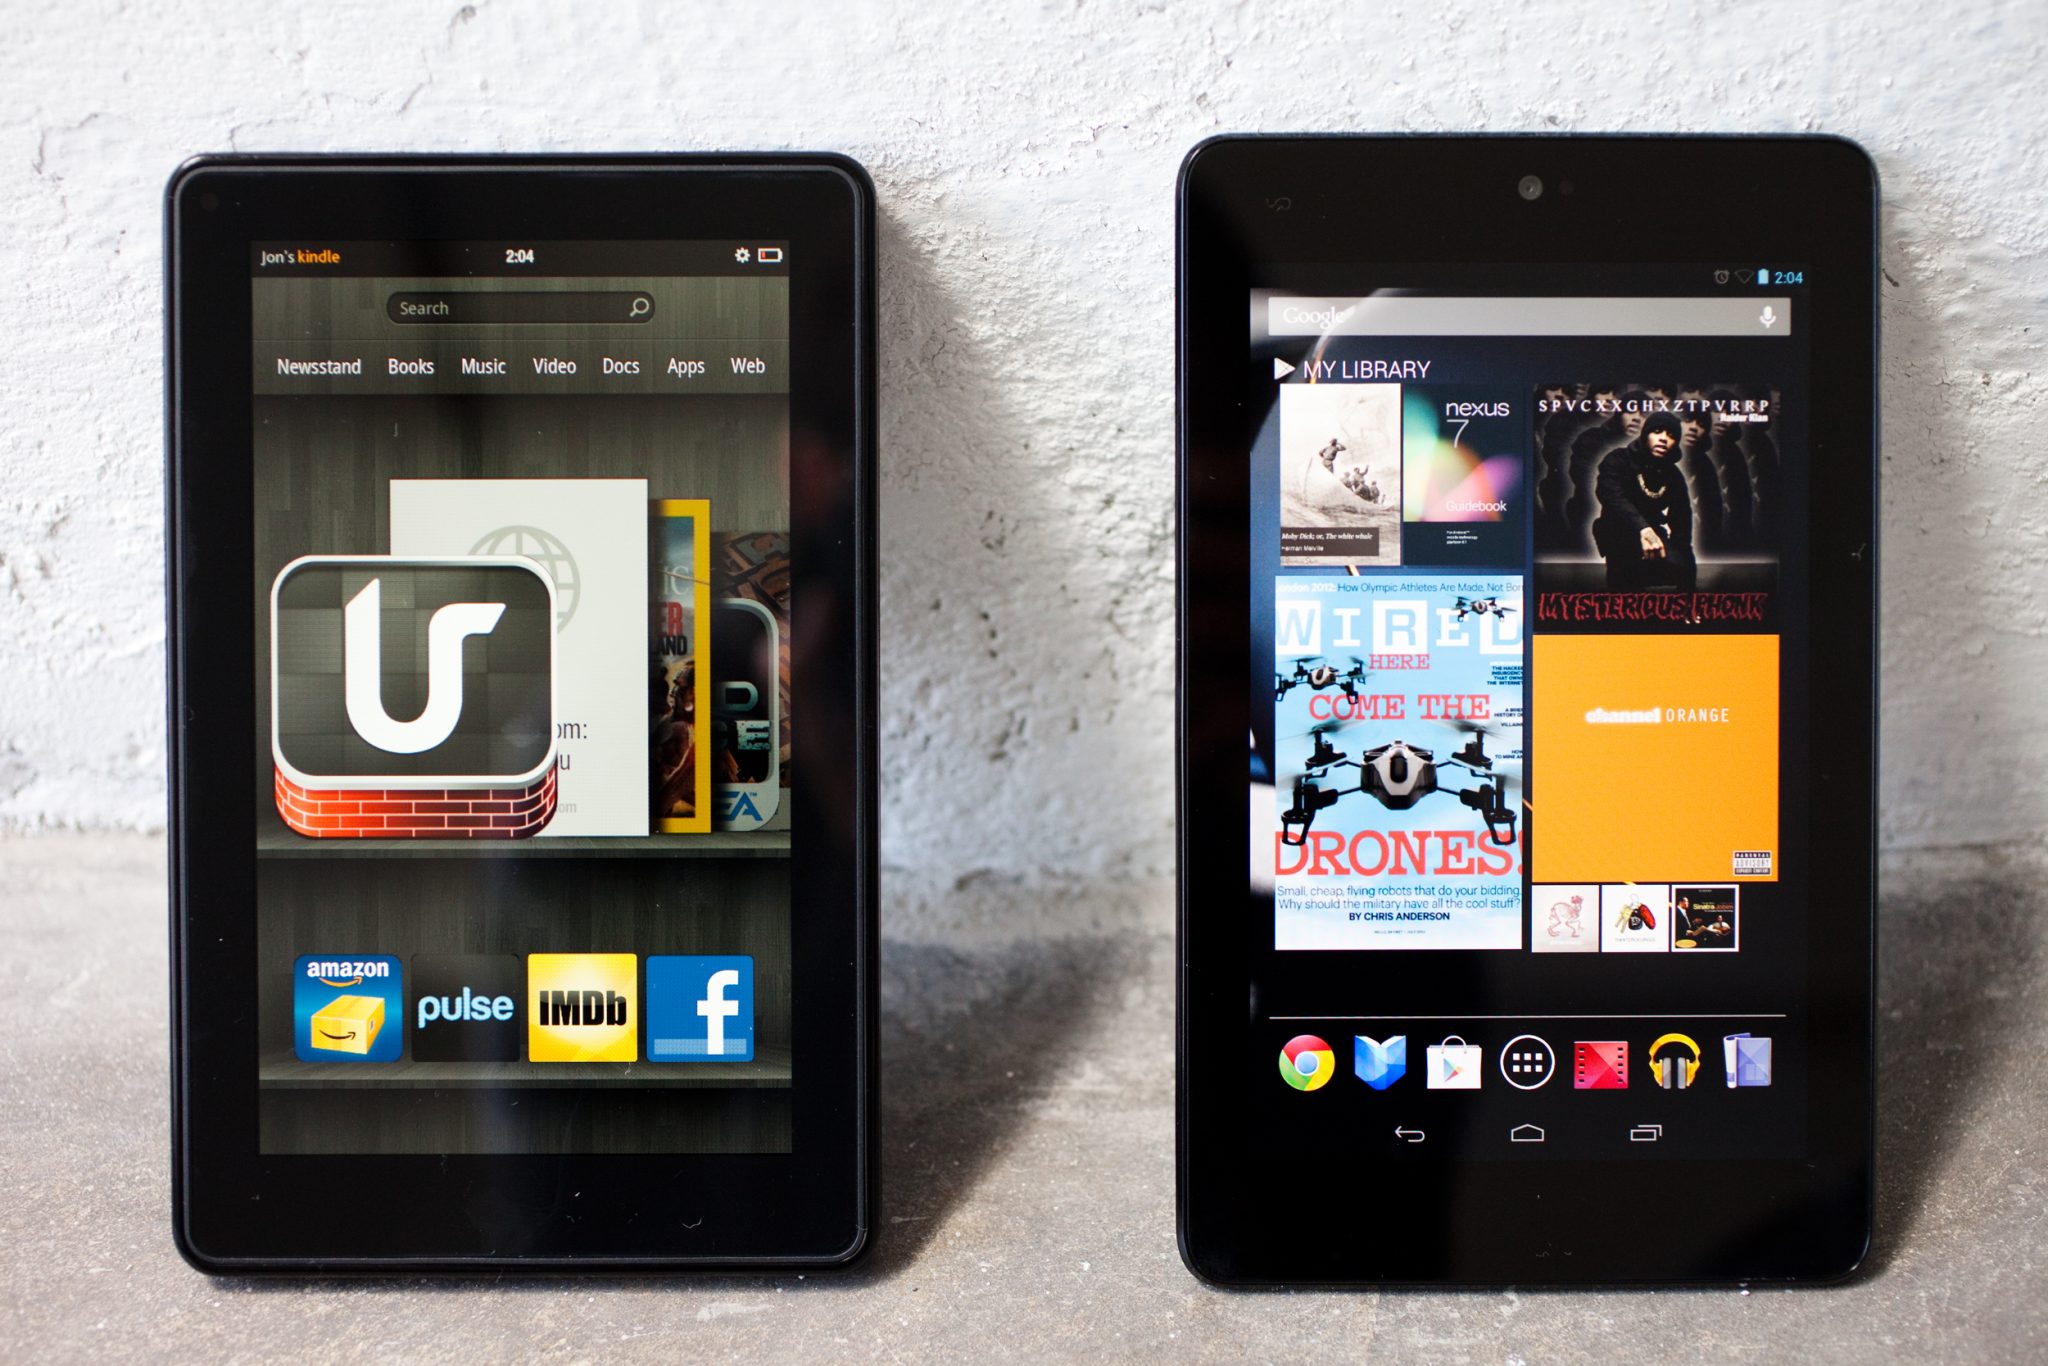 Which Android Tablet? The Amazon Kindle Fire HD or the Google Nexus 7?